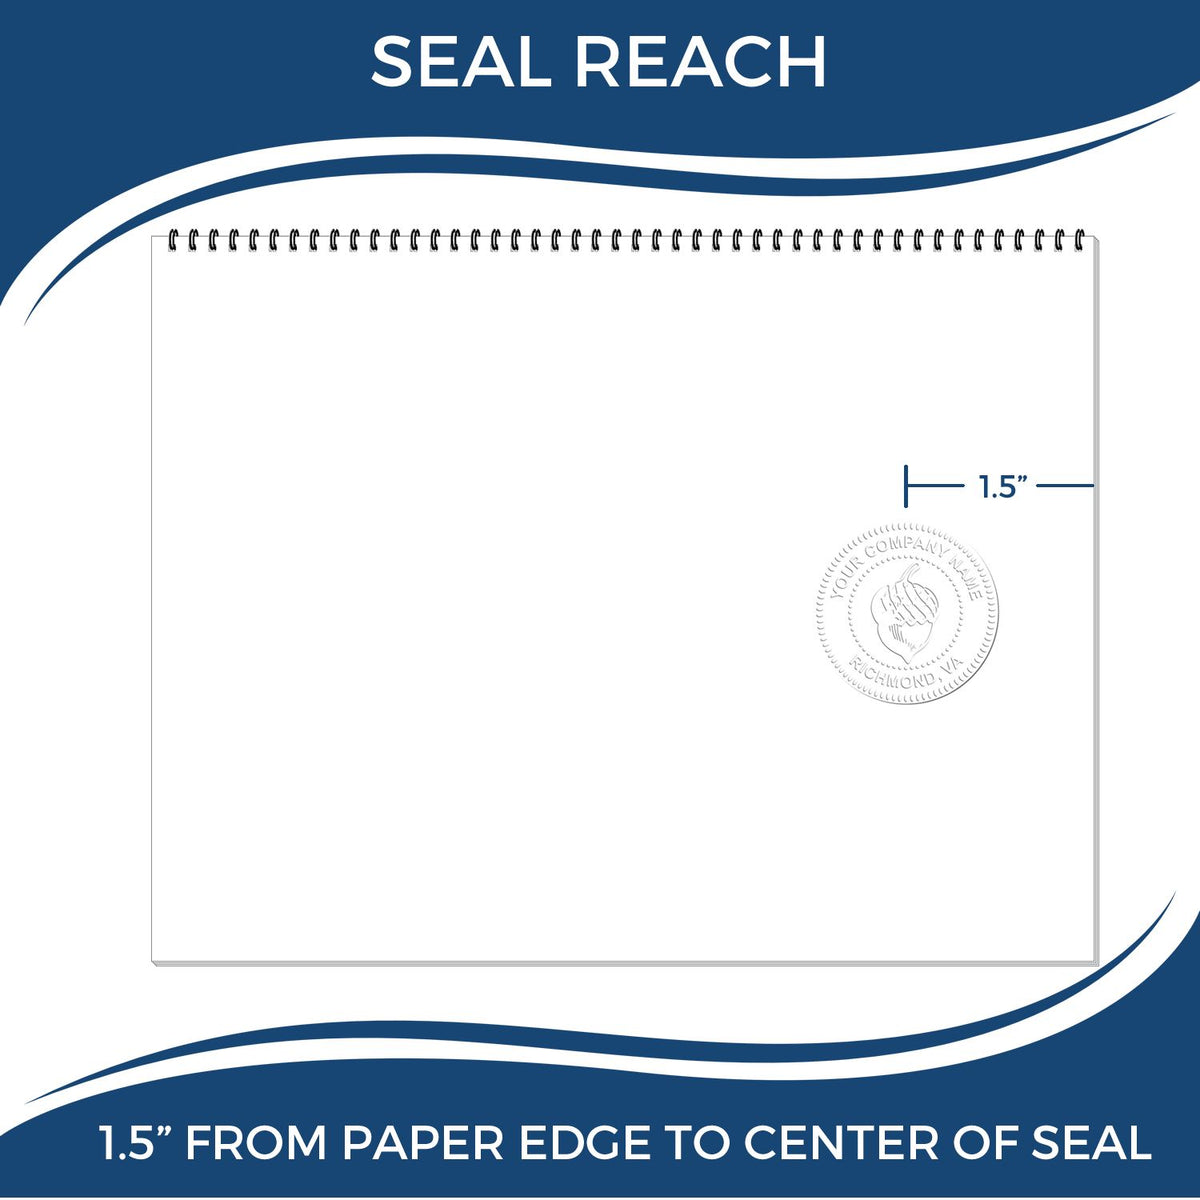 An infographic showing the seal reach which is represented by a ruler and a miniature seal image of the State of Iowa Architectural Seal Embosser